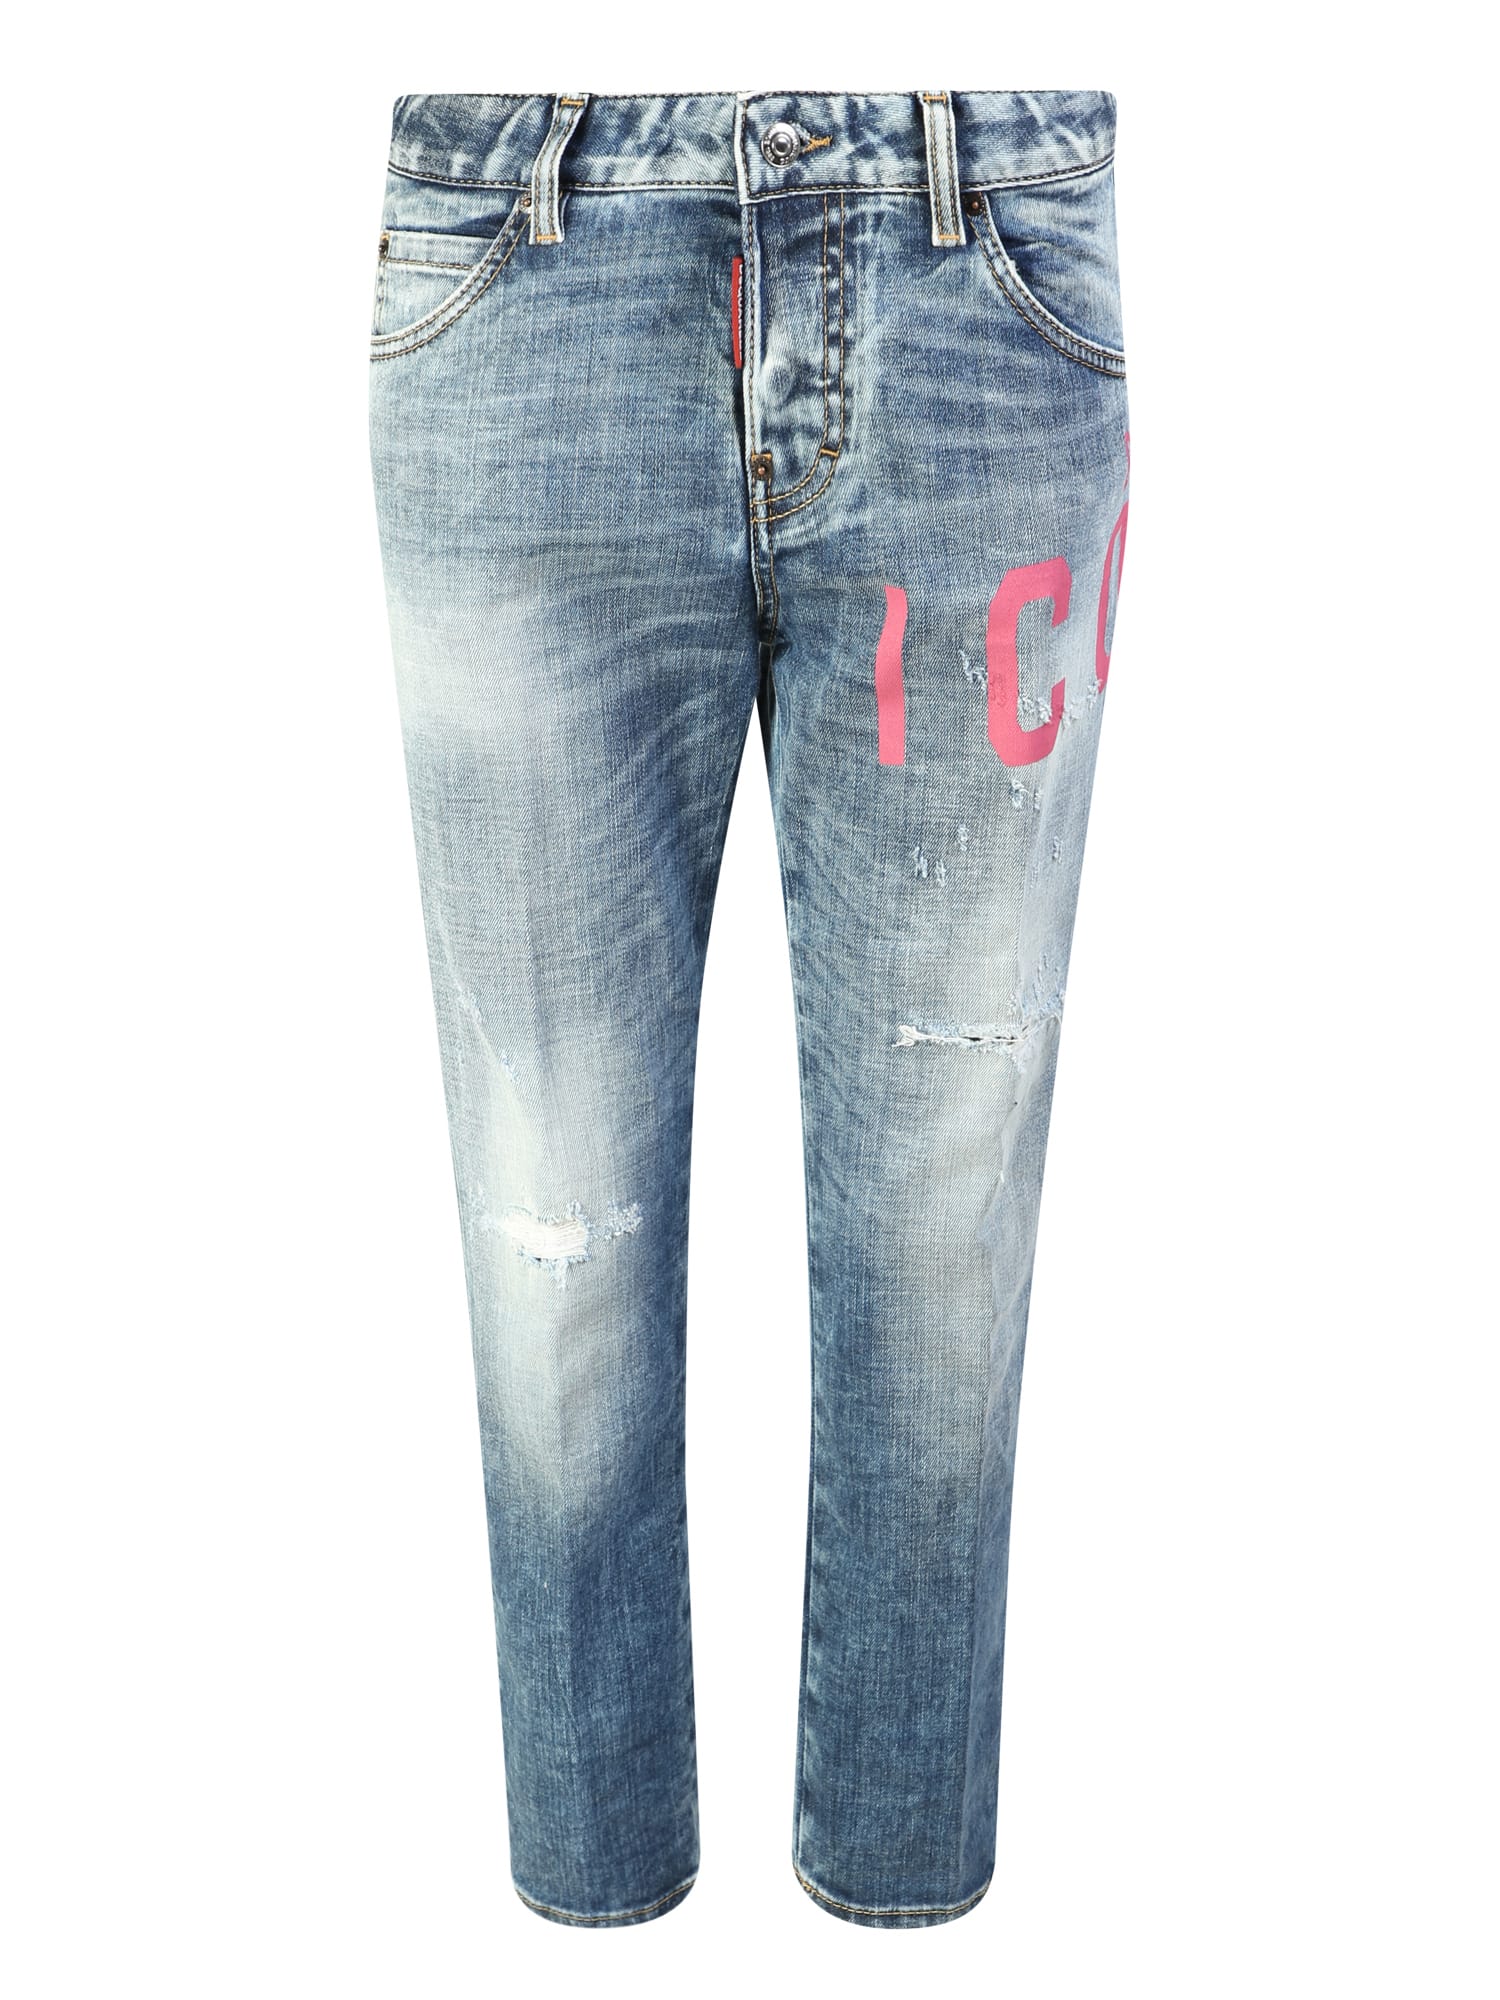 Jeans With Iconic Dsquared2 Print; Distinctive Garment Of The Maison And An Undisputed Must